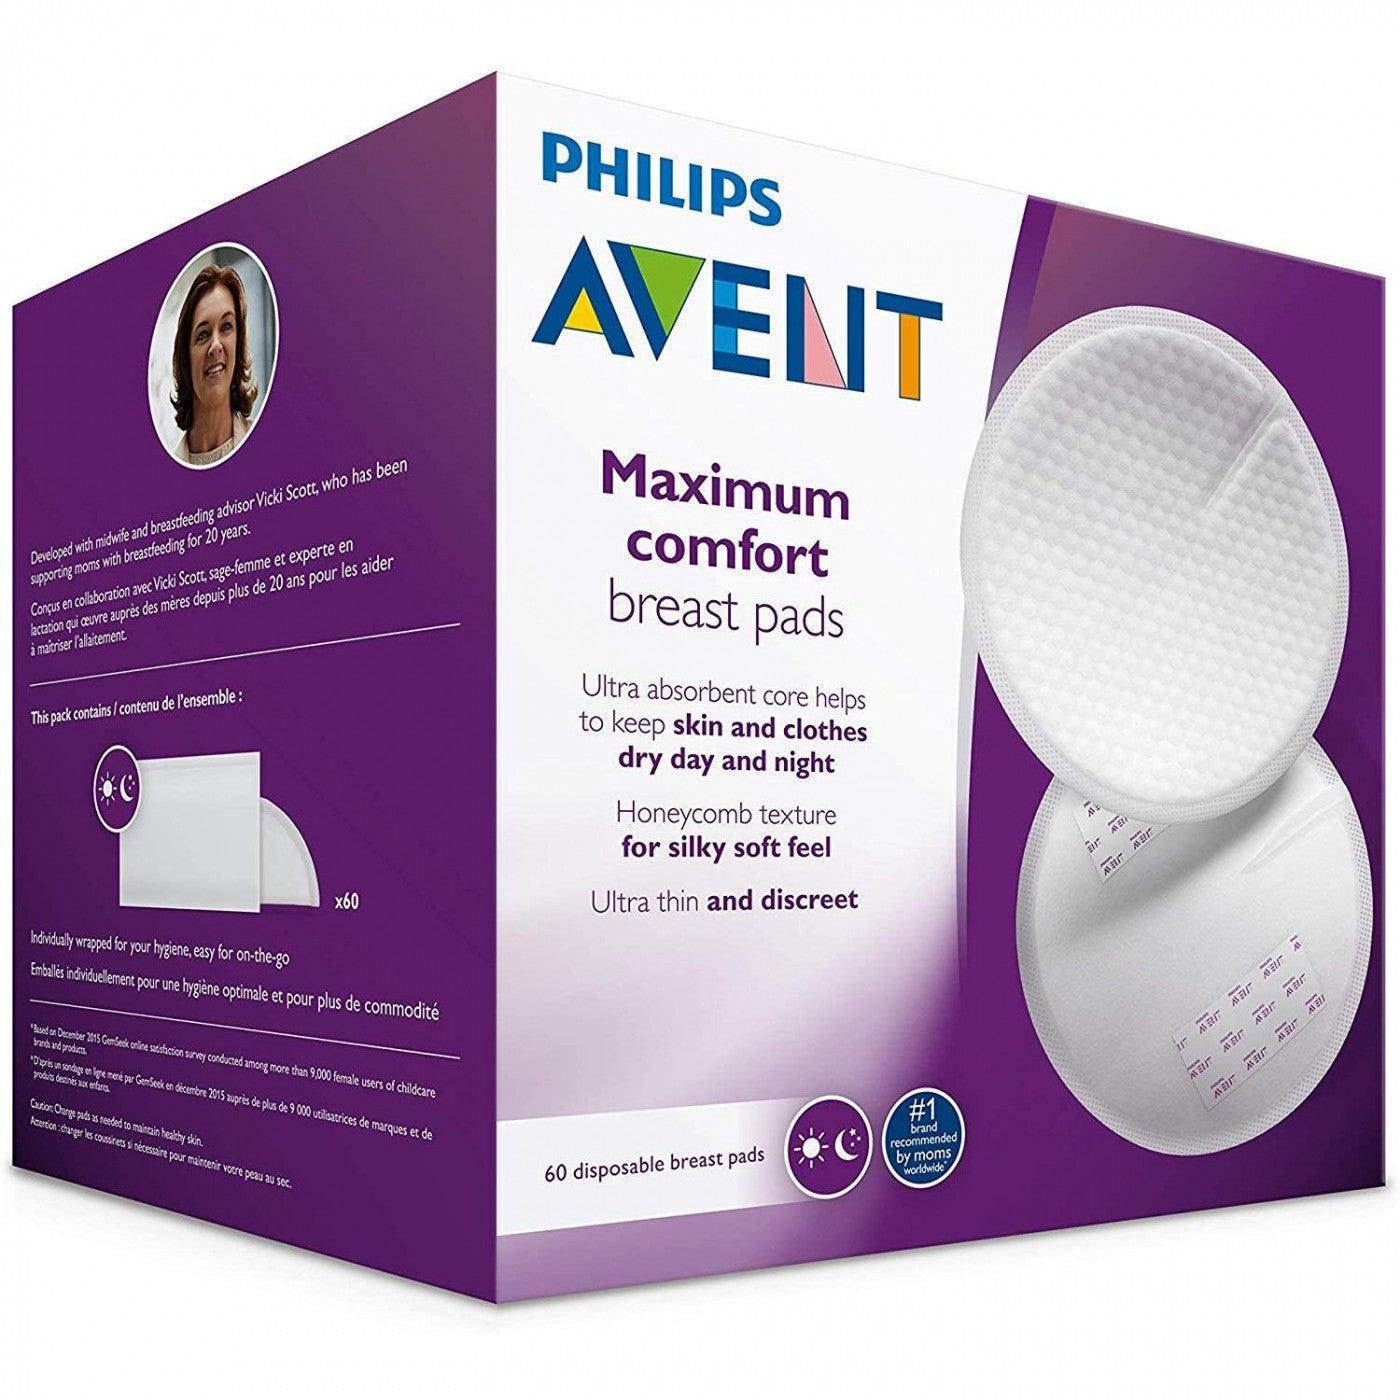 Philips Avent - AVT254/61 Avent Disposable Breast Pads x60 - Mari Kali Stores Cyprus